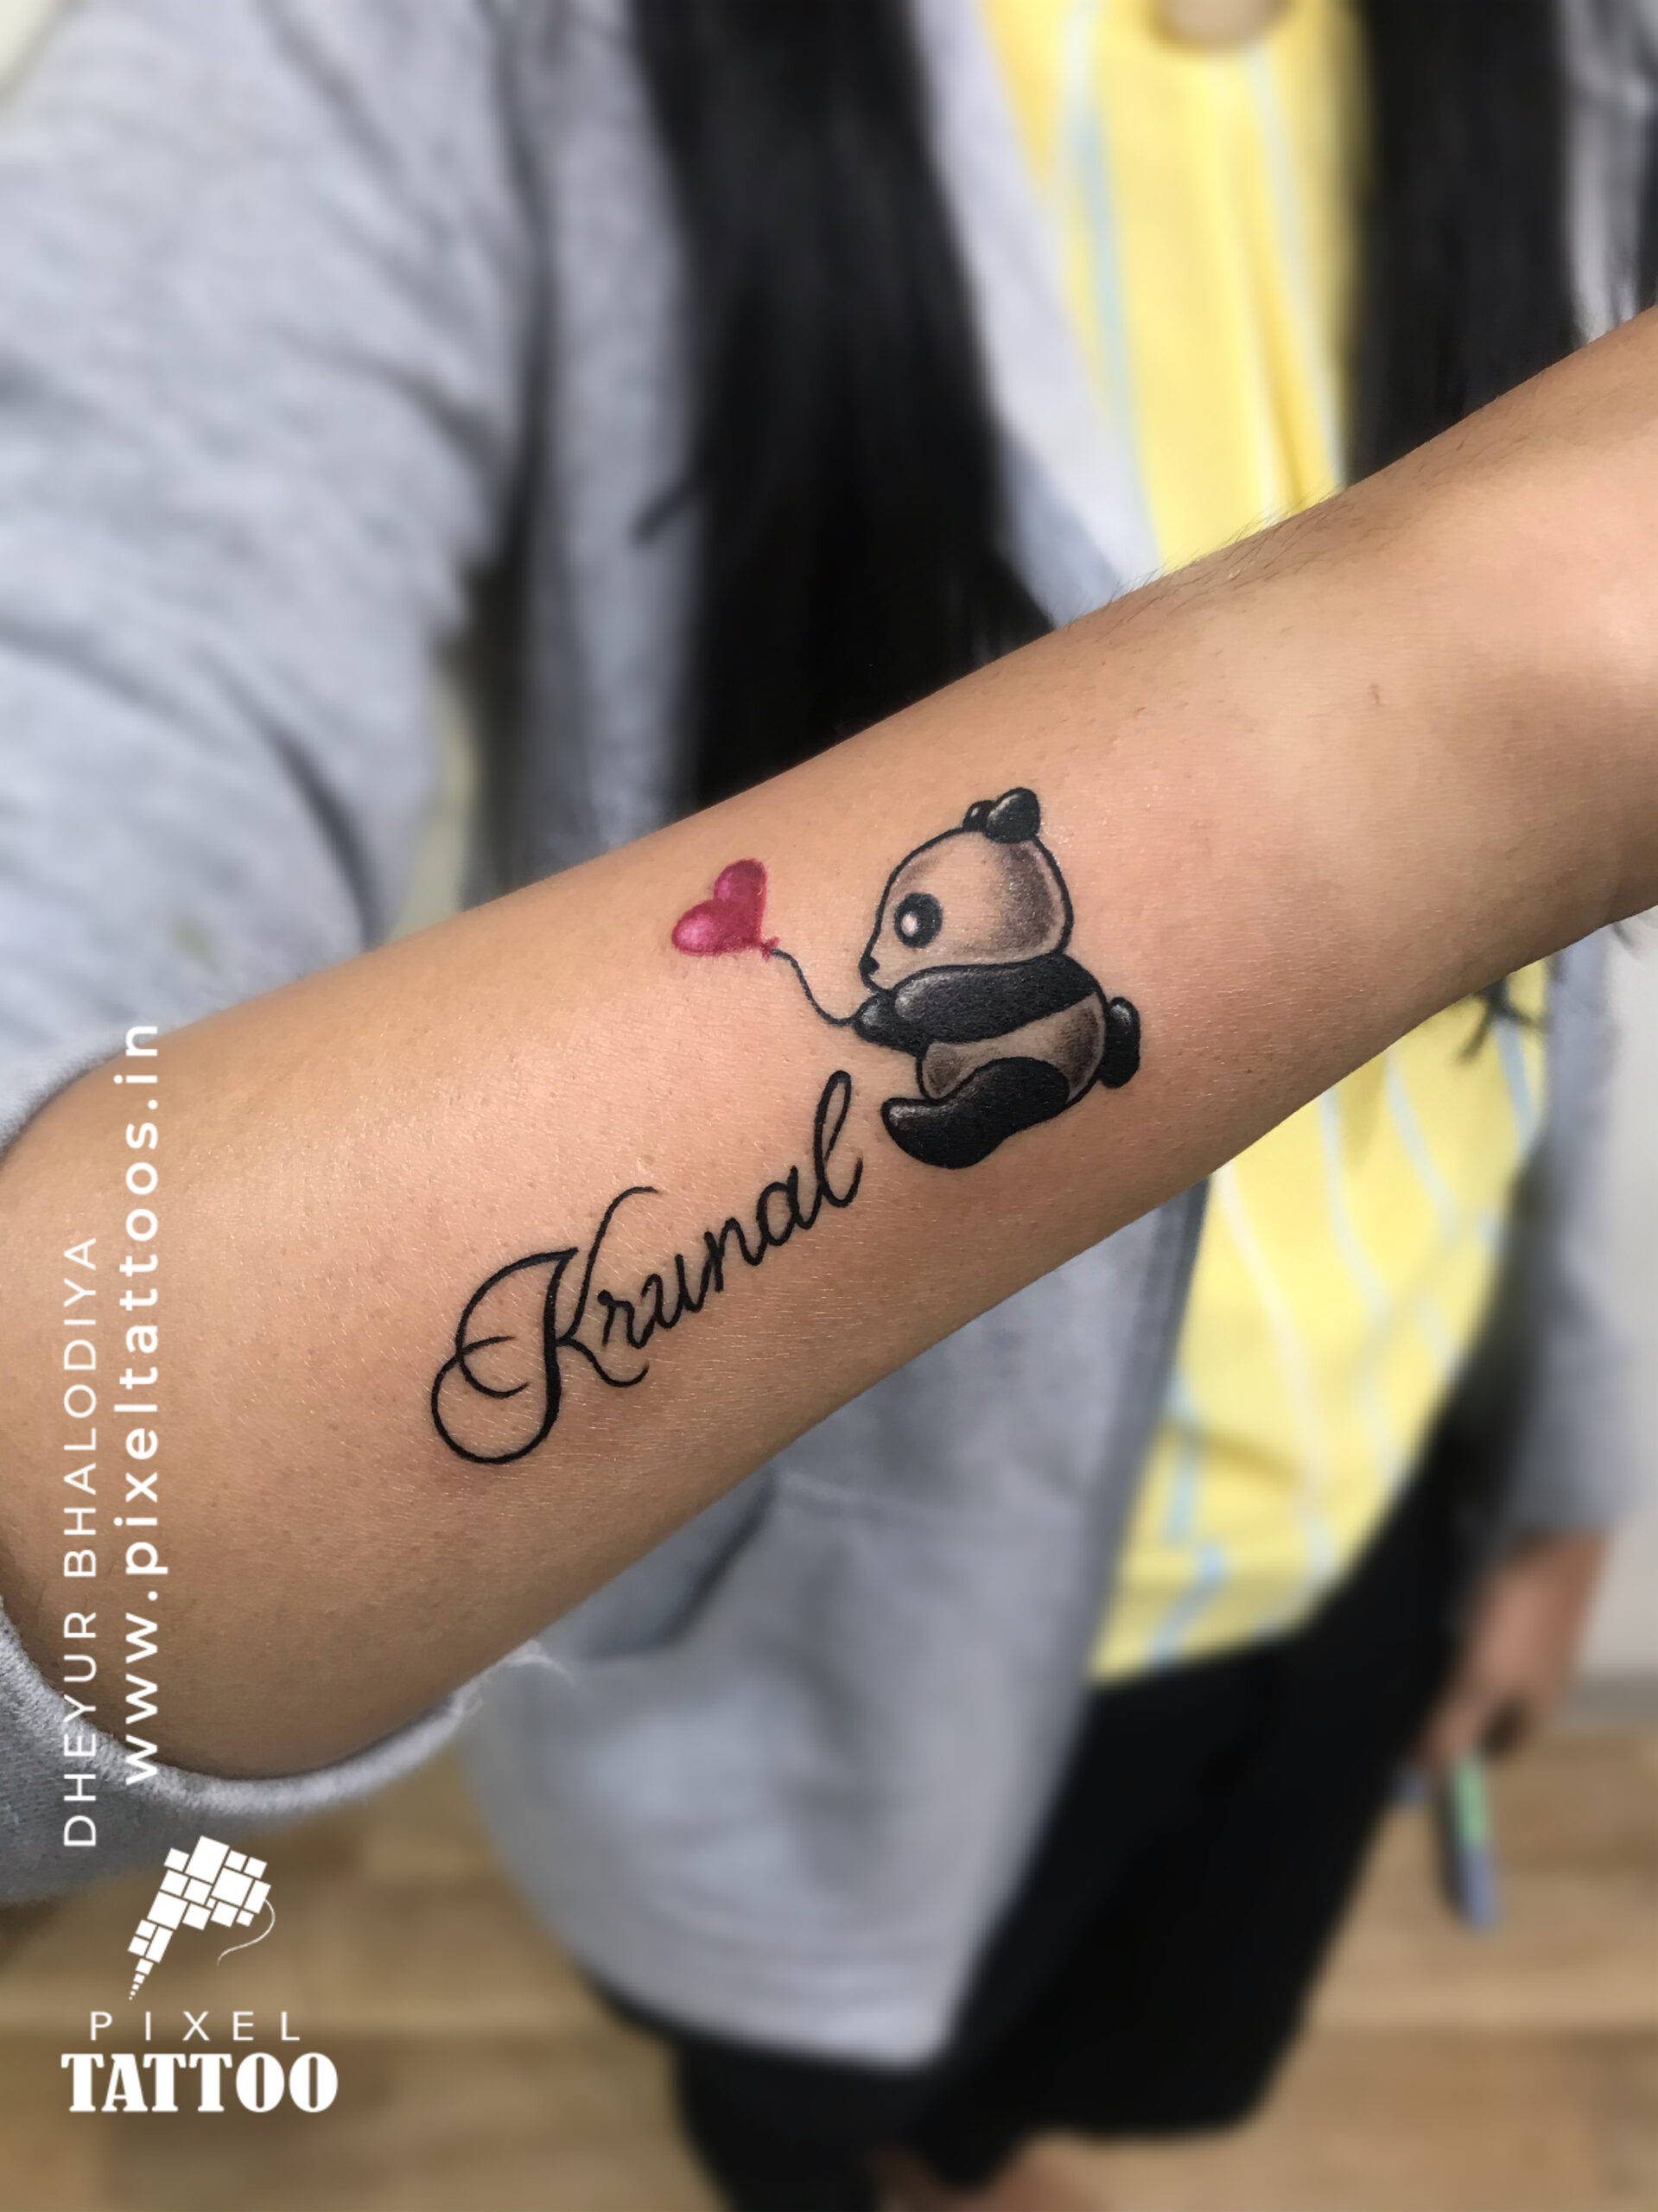 Cover-up Tattoos - Pixel Tattoos at Rs 500/square inch in Surat